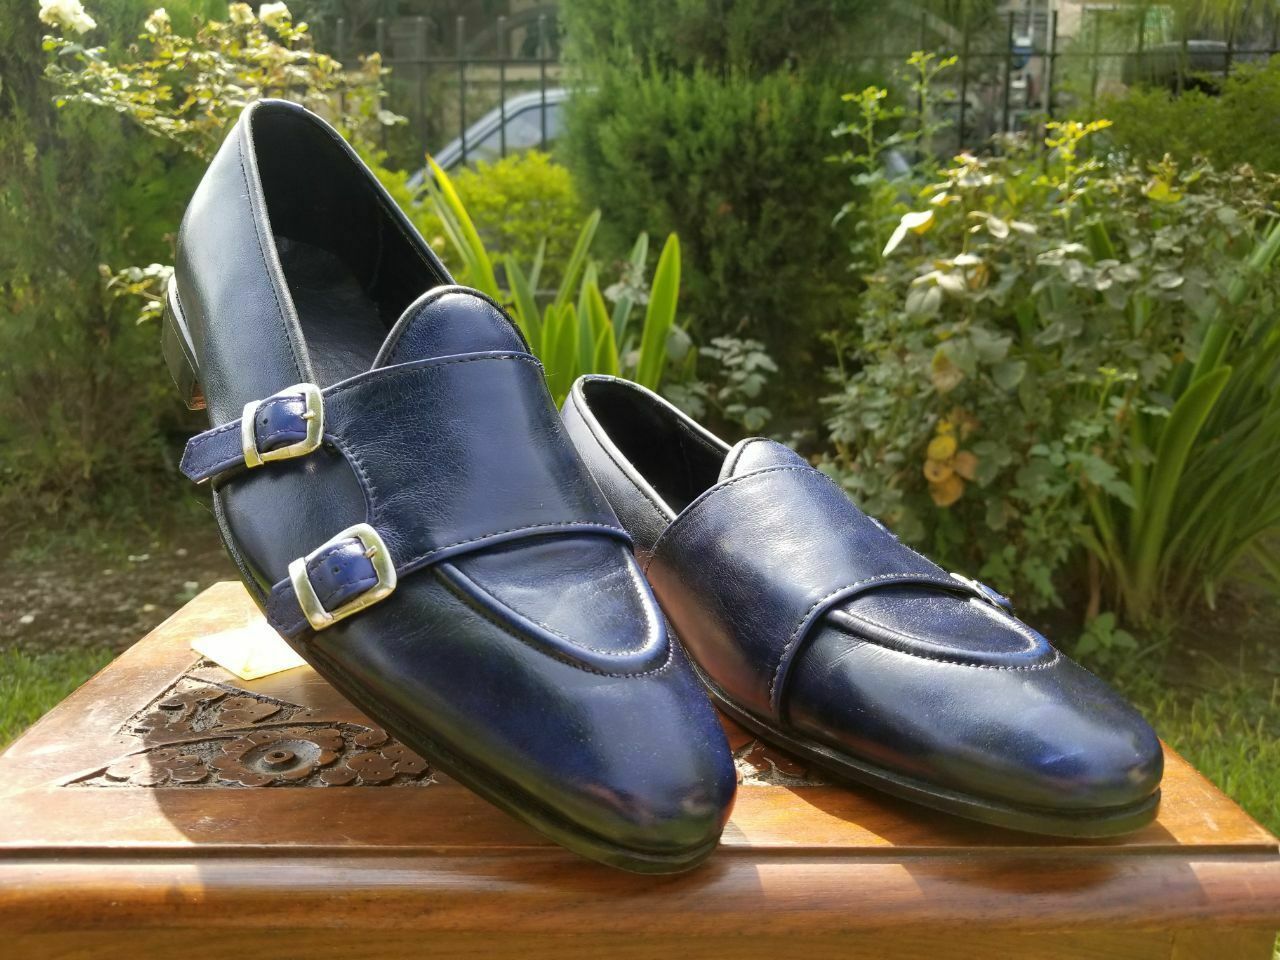 Men's Handmade Genuine Leather Slip-On Strap Double Monk Party Shoes 2019